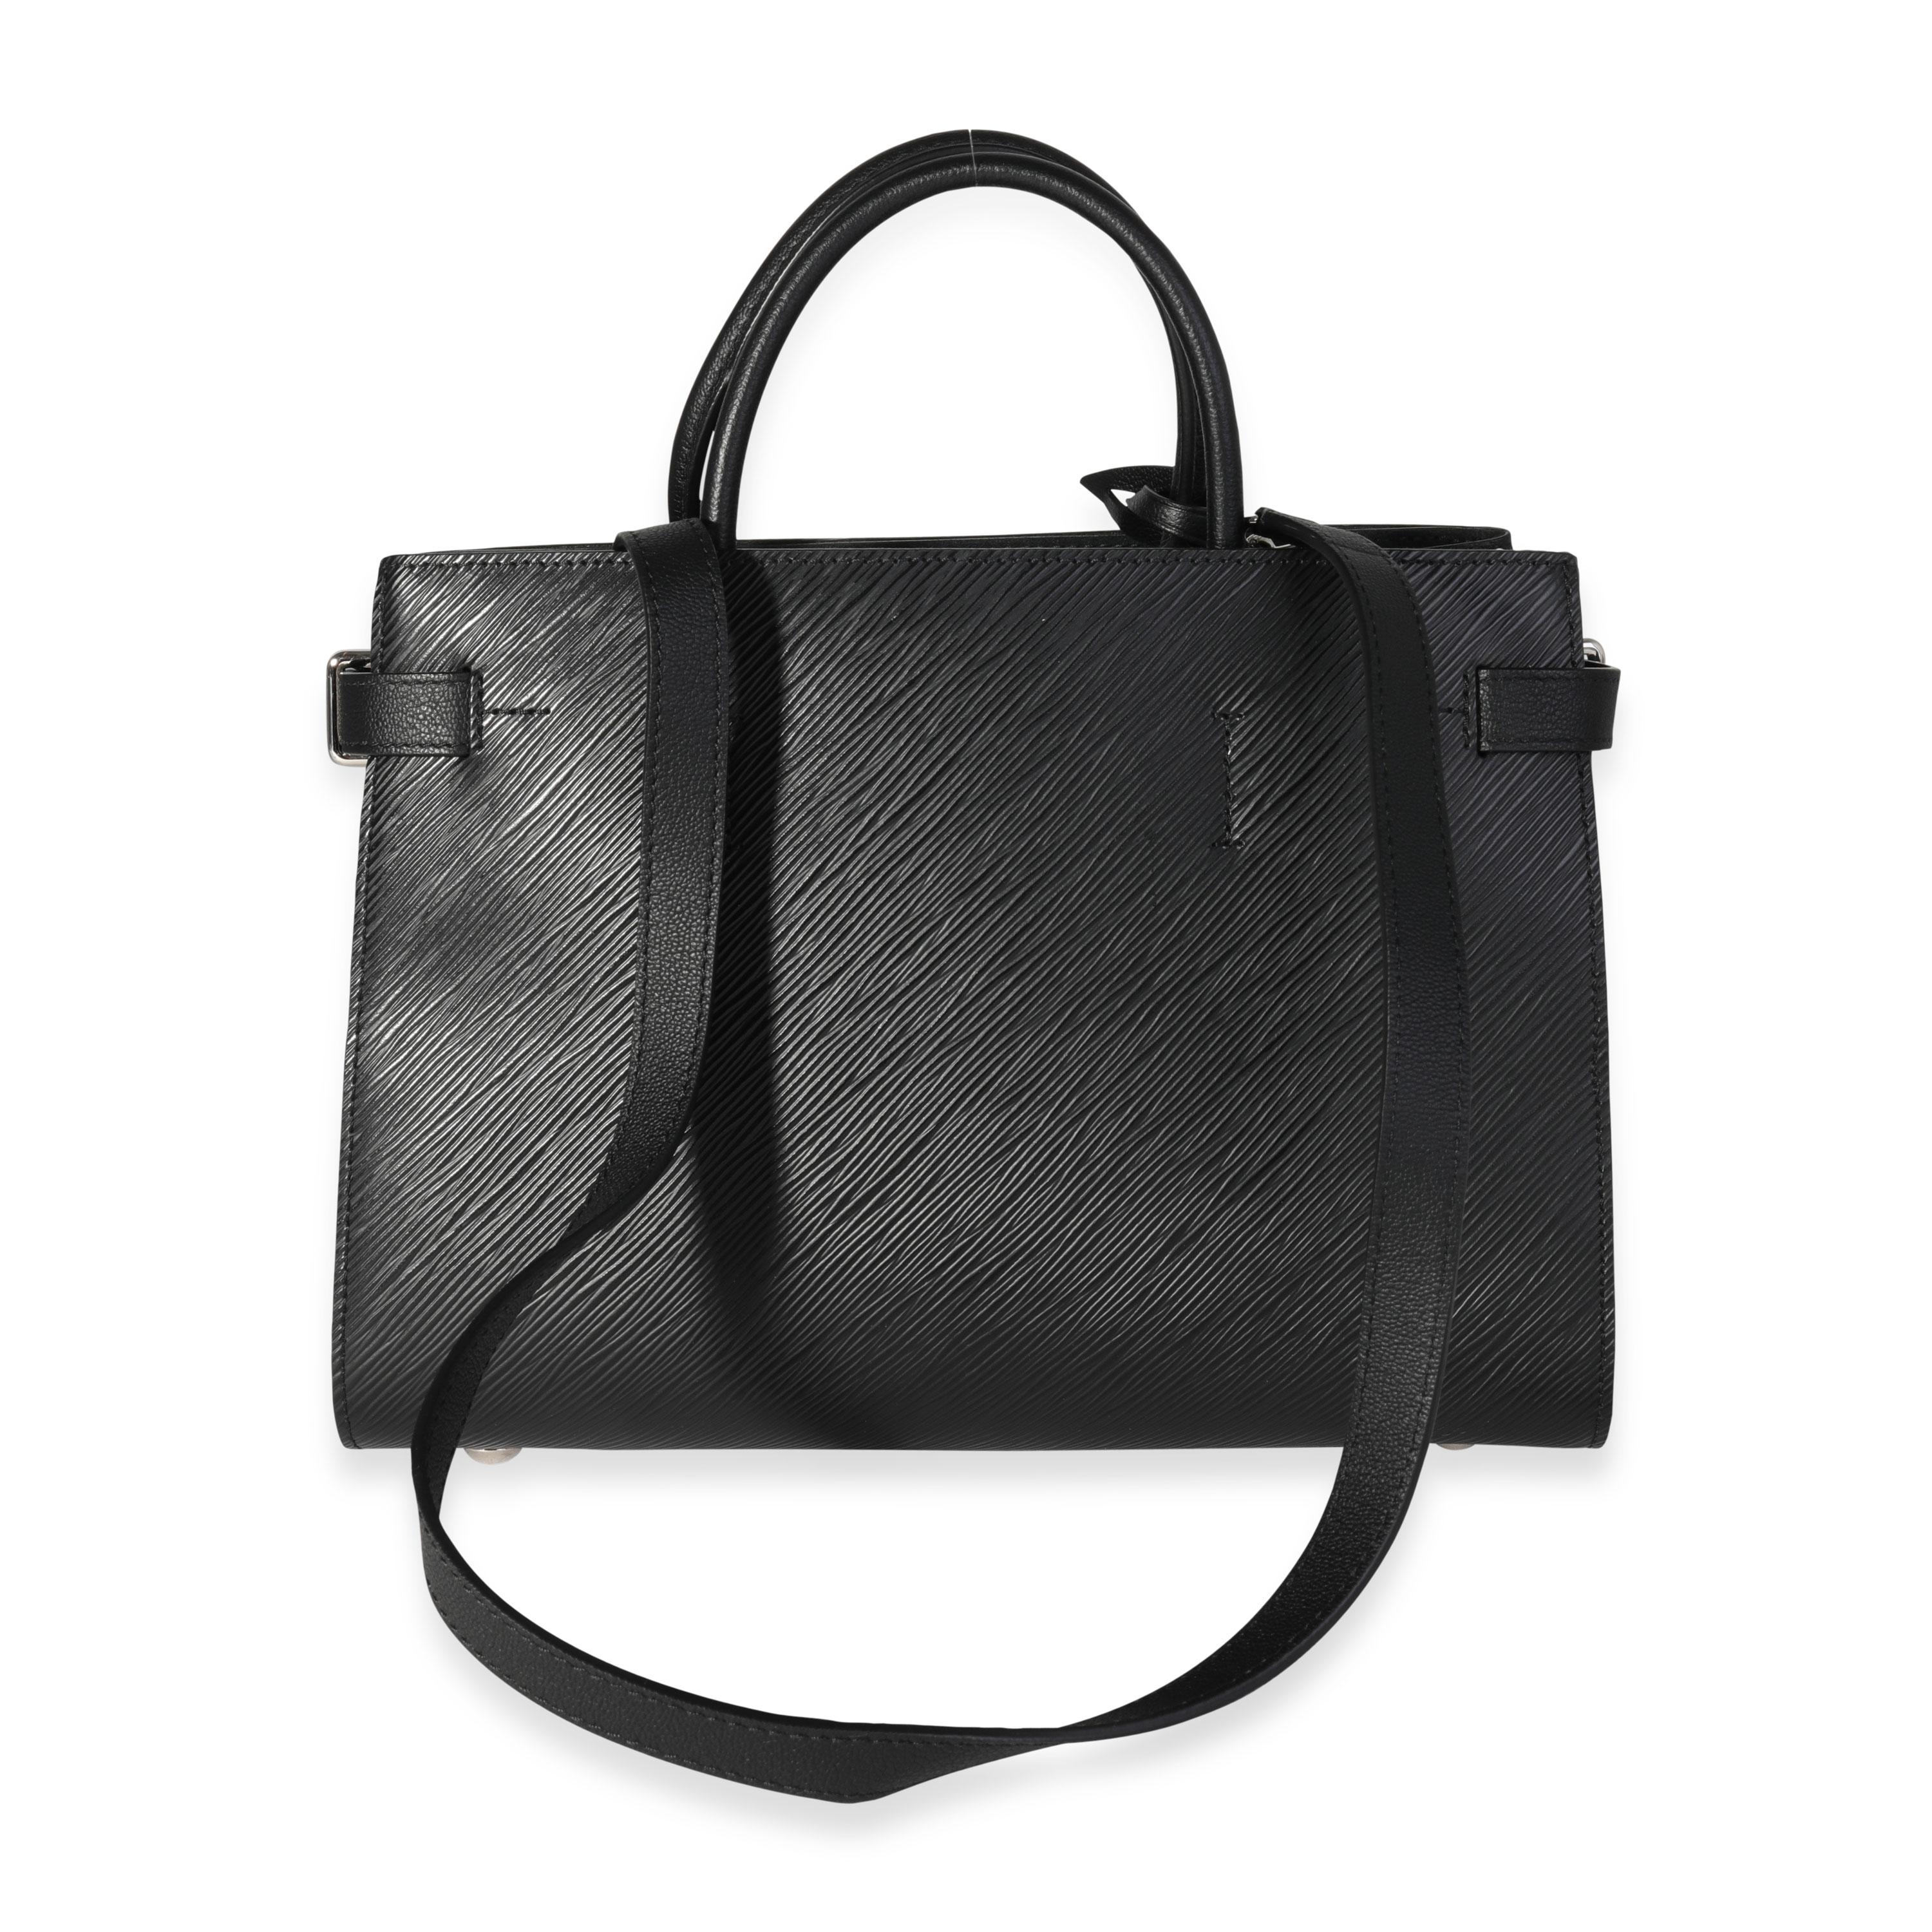 Listing Title: Louis Vuitton Black Epi Leather Twist Tote
SKU: 116662
MSRP: 3250.00
Condition: Pre-owned (3000)
Handbag Condition: Very Good
Condition Comments: Very Good Condition. Wear on feet. Signs of use on interior.
Brand: Louis Vuitton
Model: